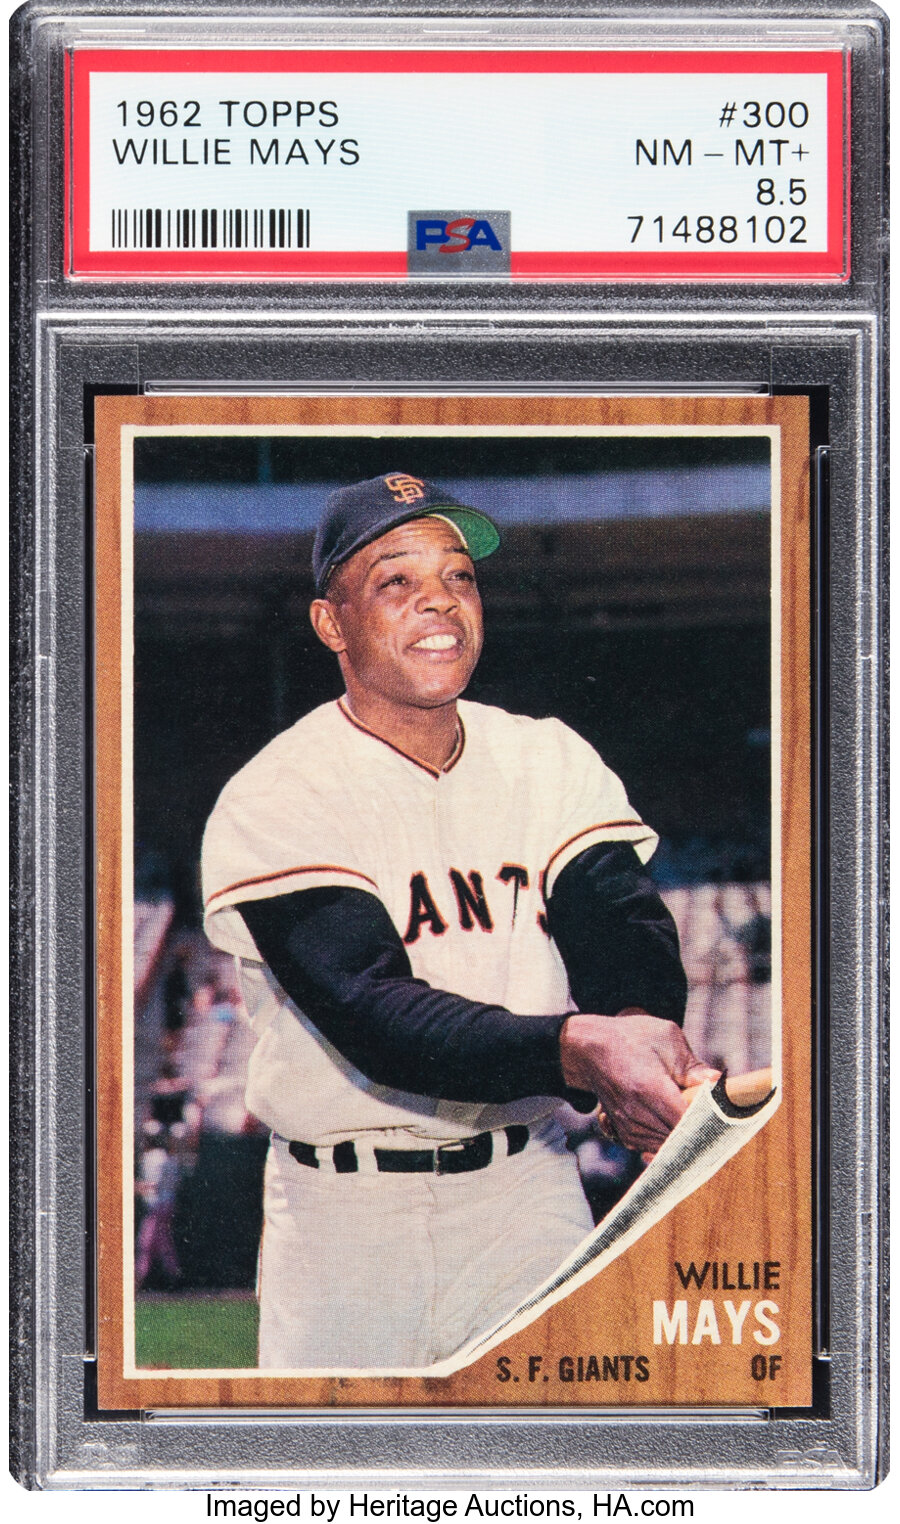 1962 Topps Willie Mays #300 PSA NM-MT+ 8.5 - Pop Four